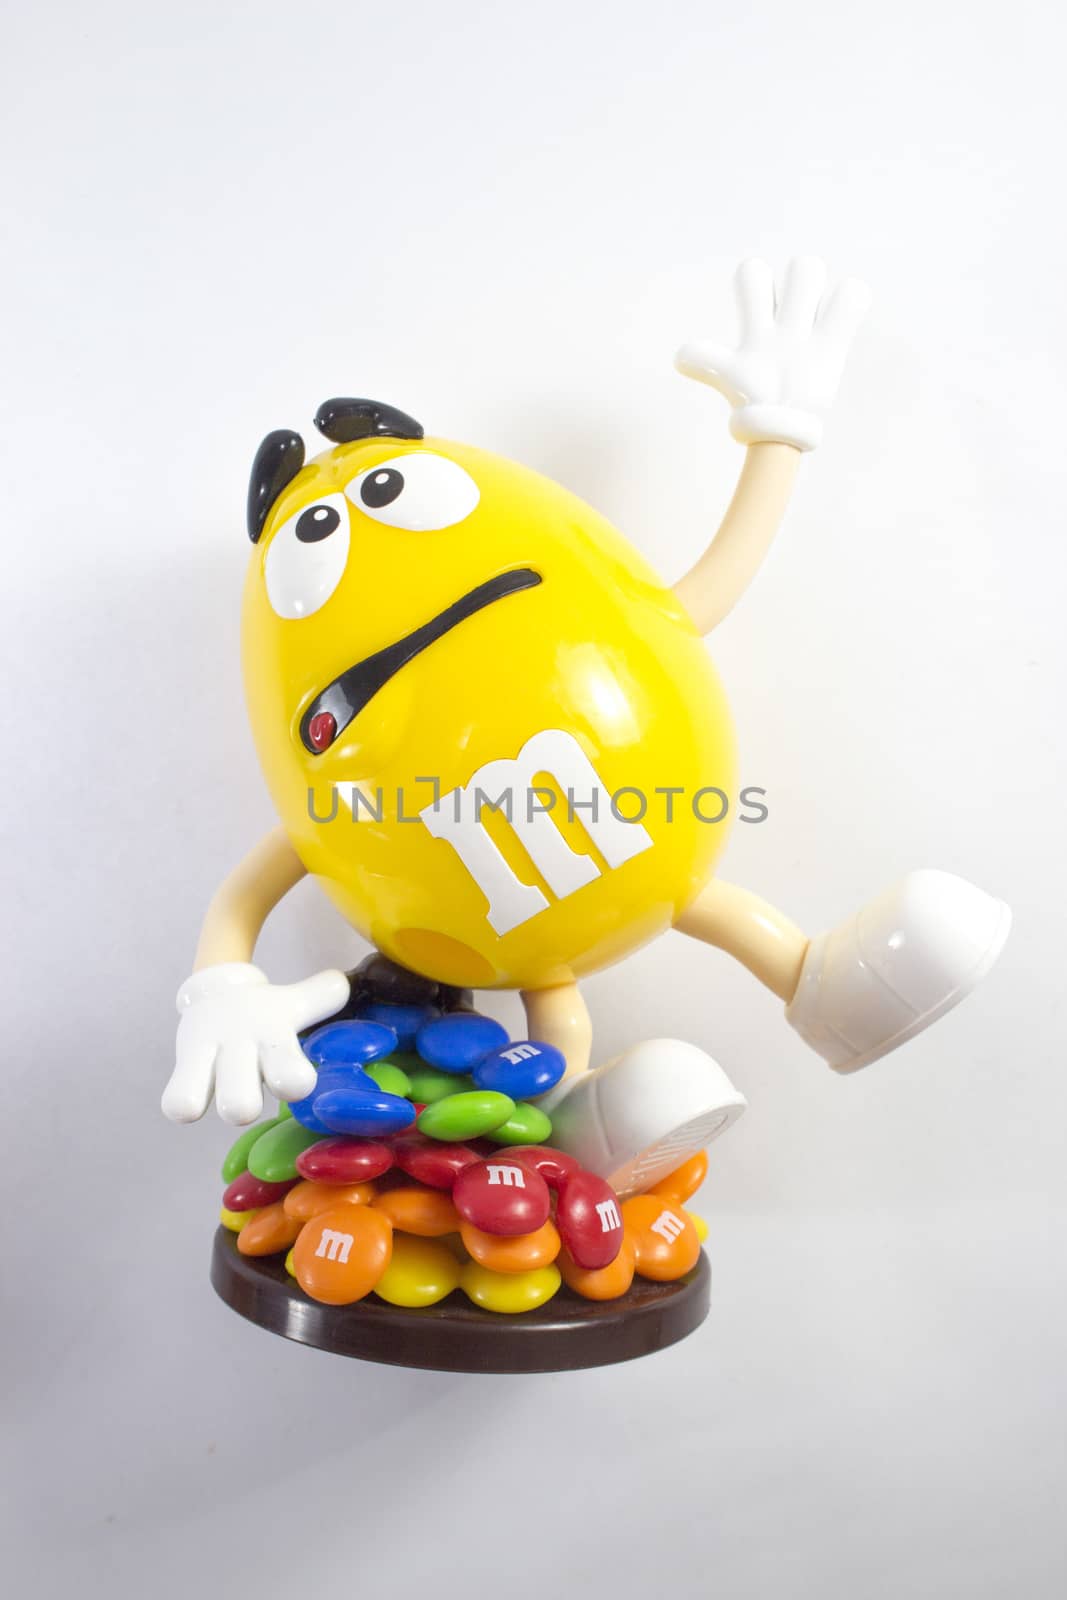 M&M's characters by designsstock